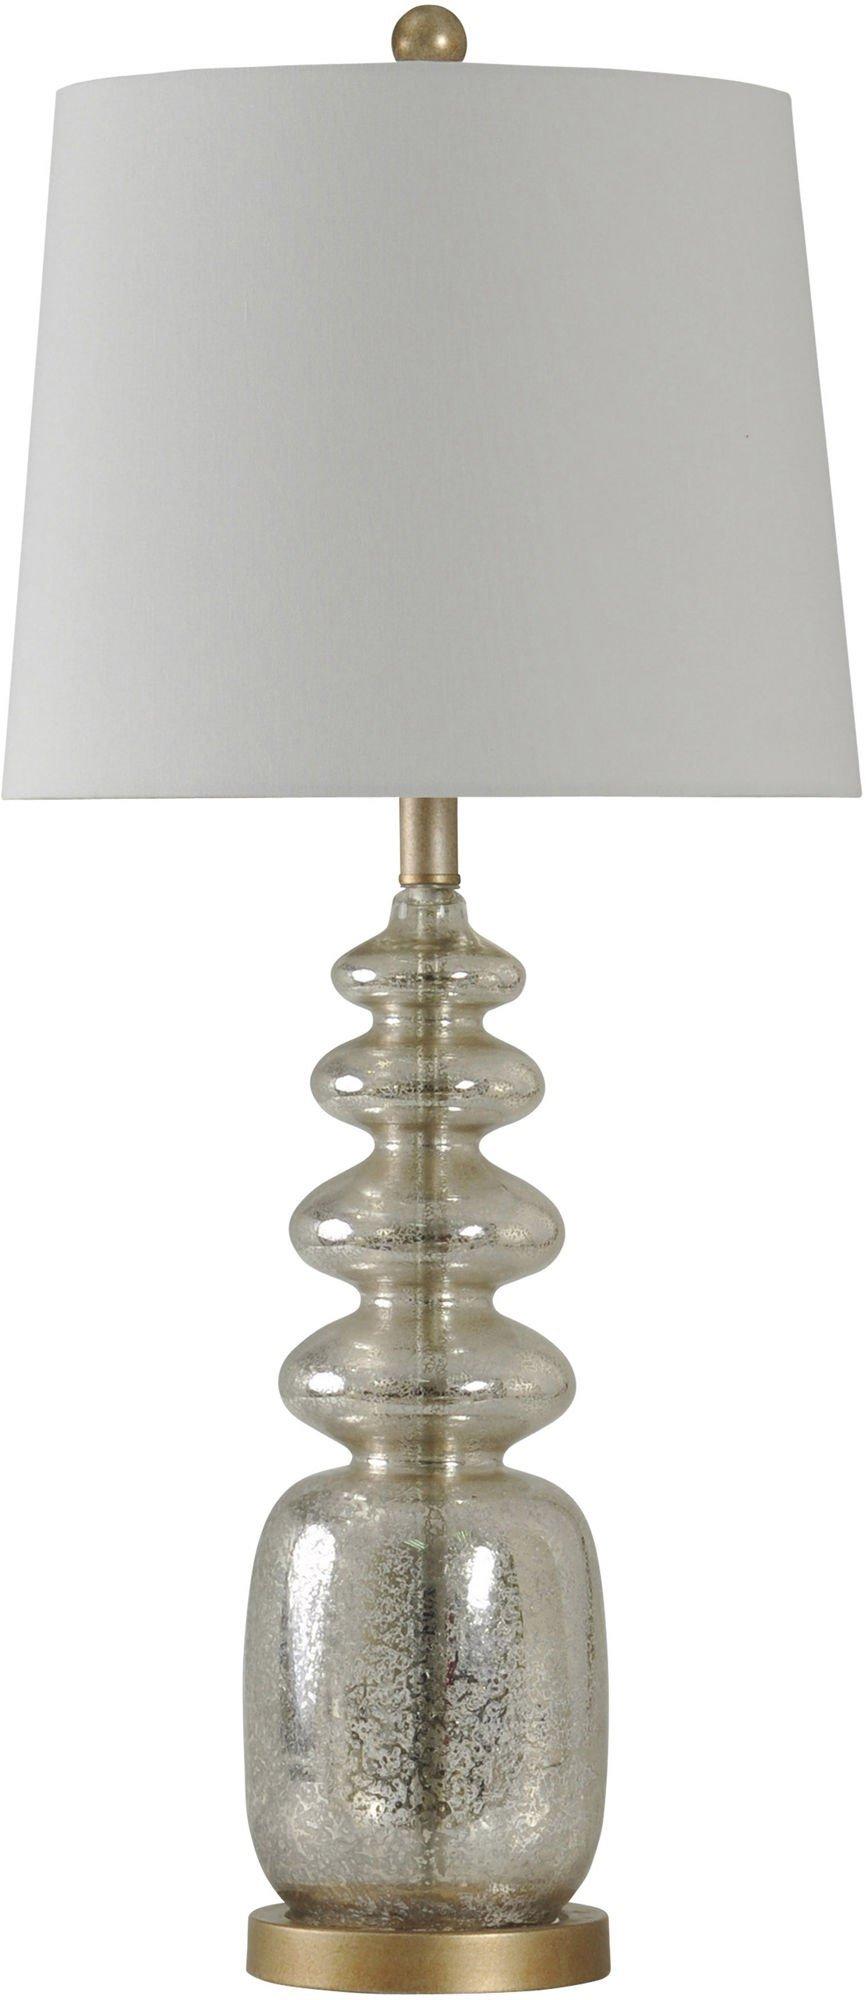 Transitional Glass & Steel Table Lamp